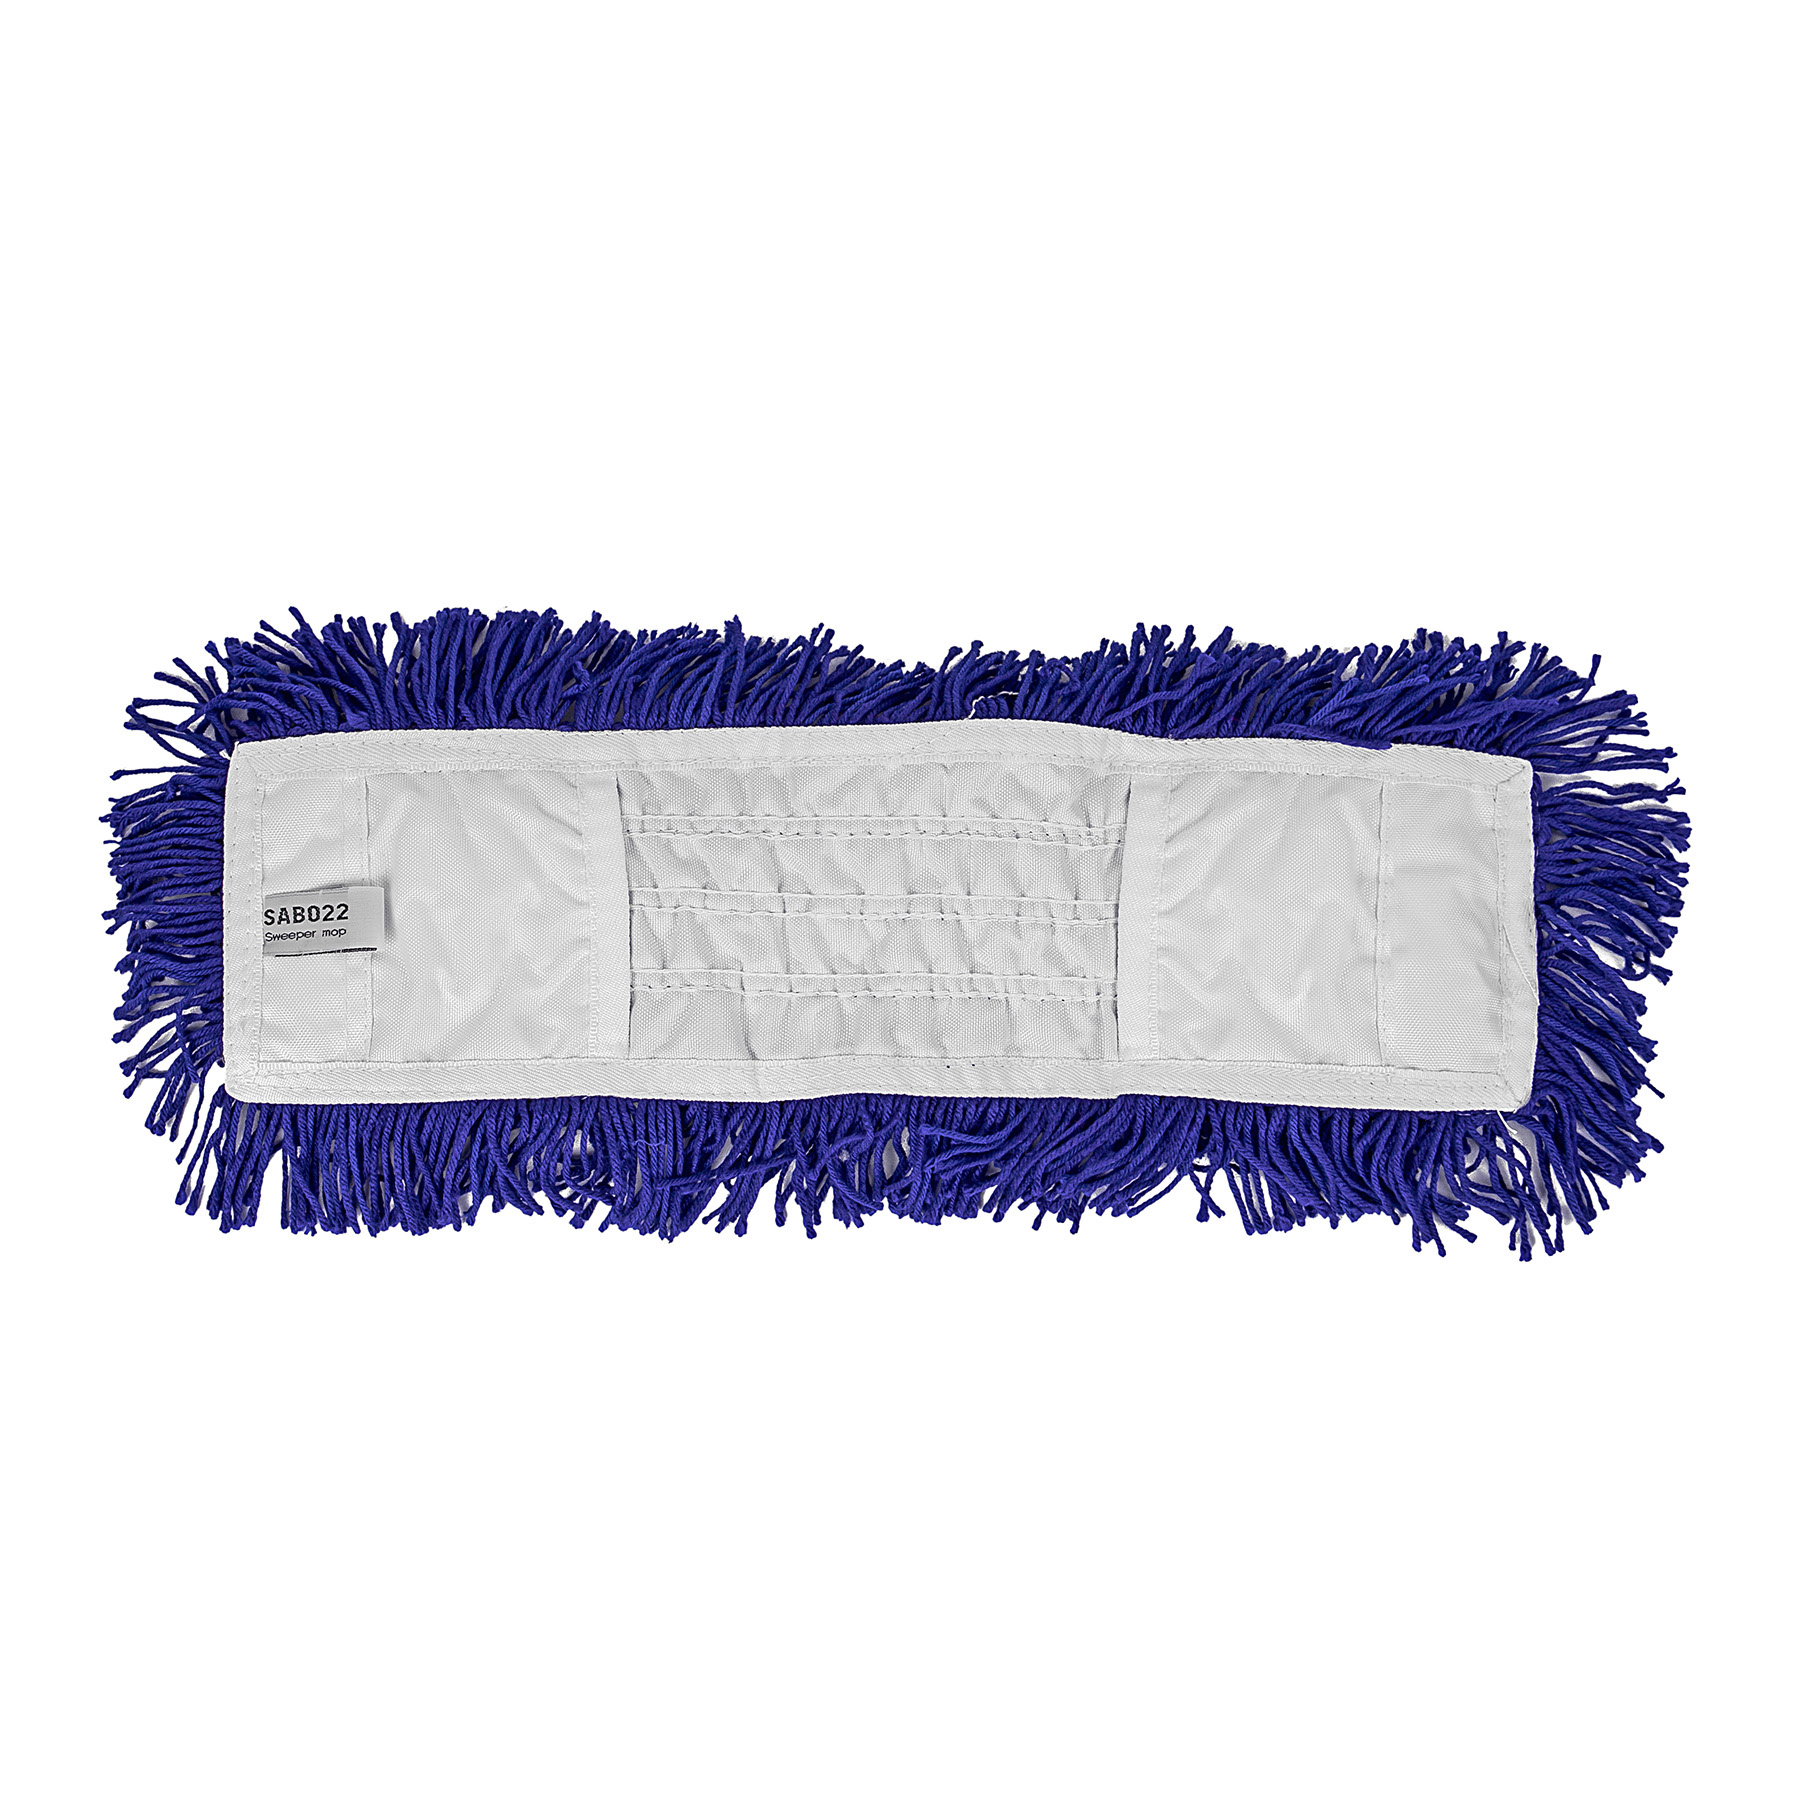 16" Dust Control Blue Sweeper Mop Head Replacement - 102314